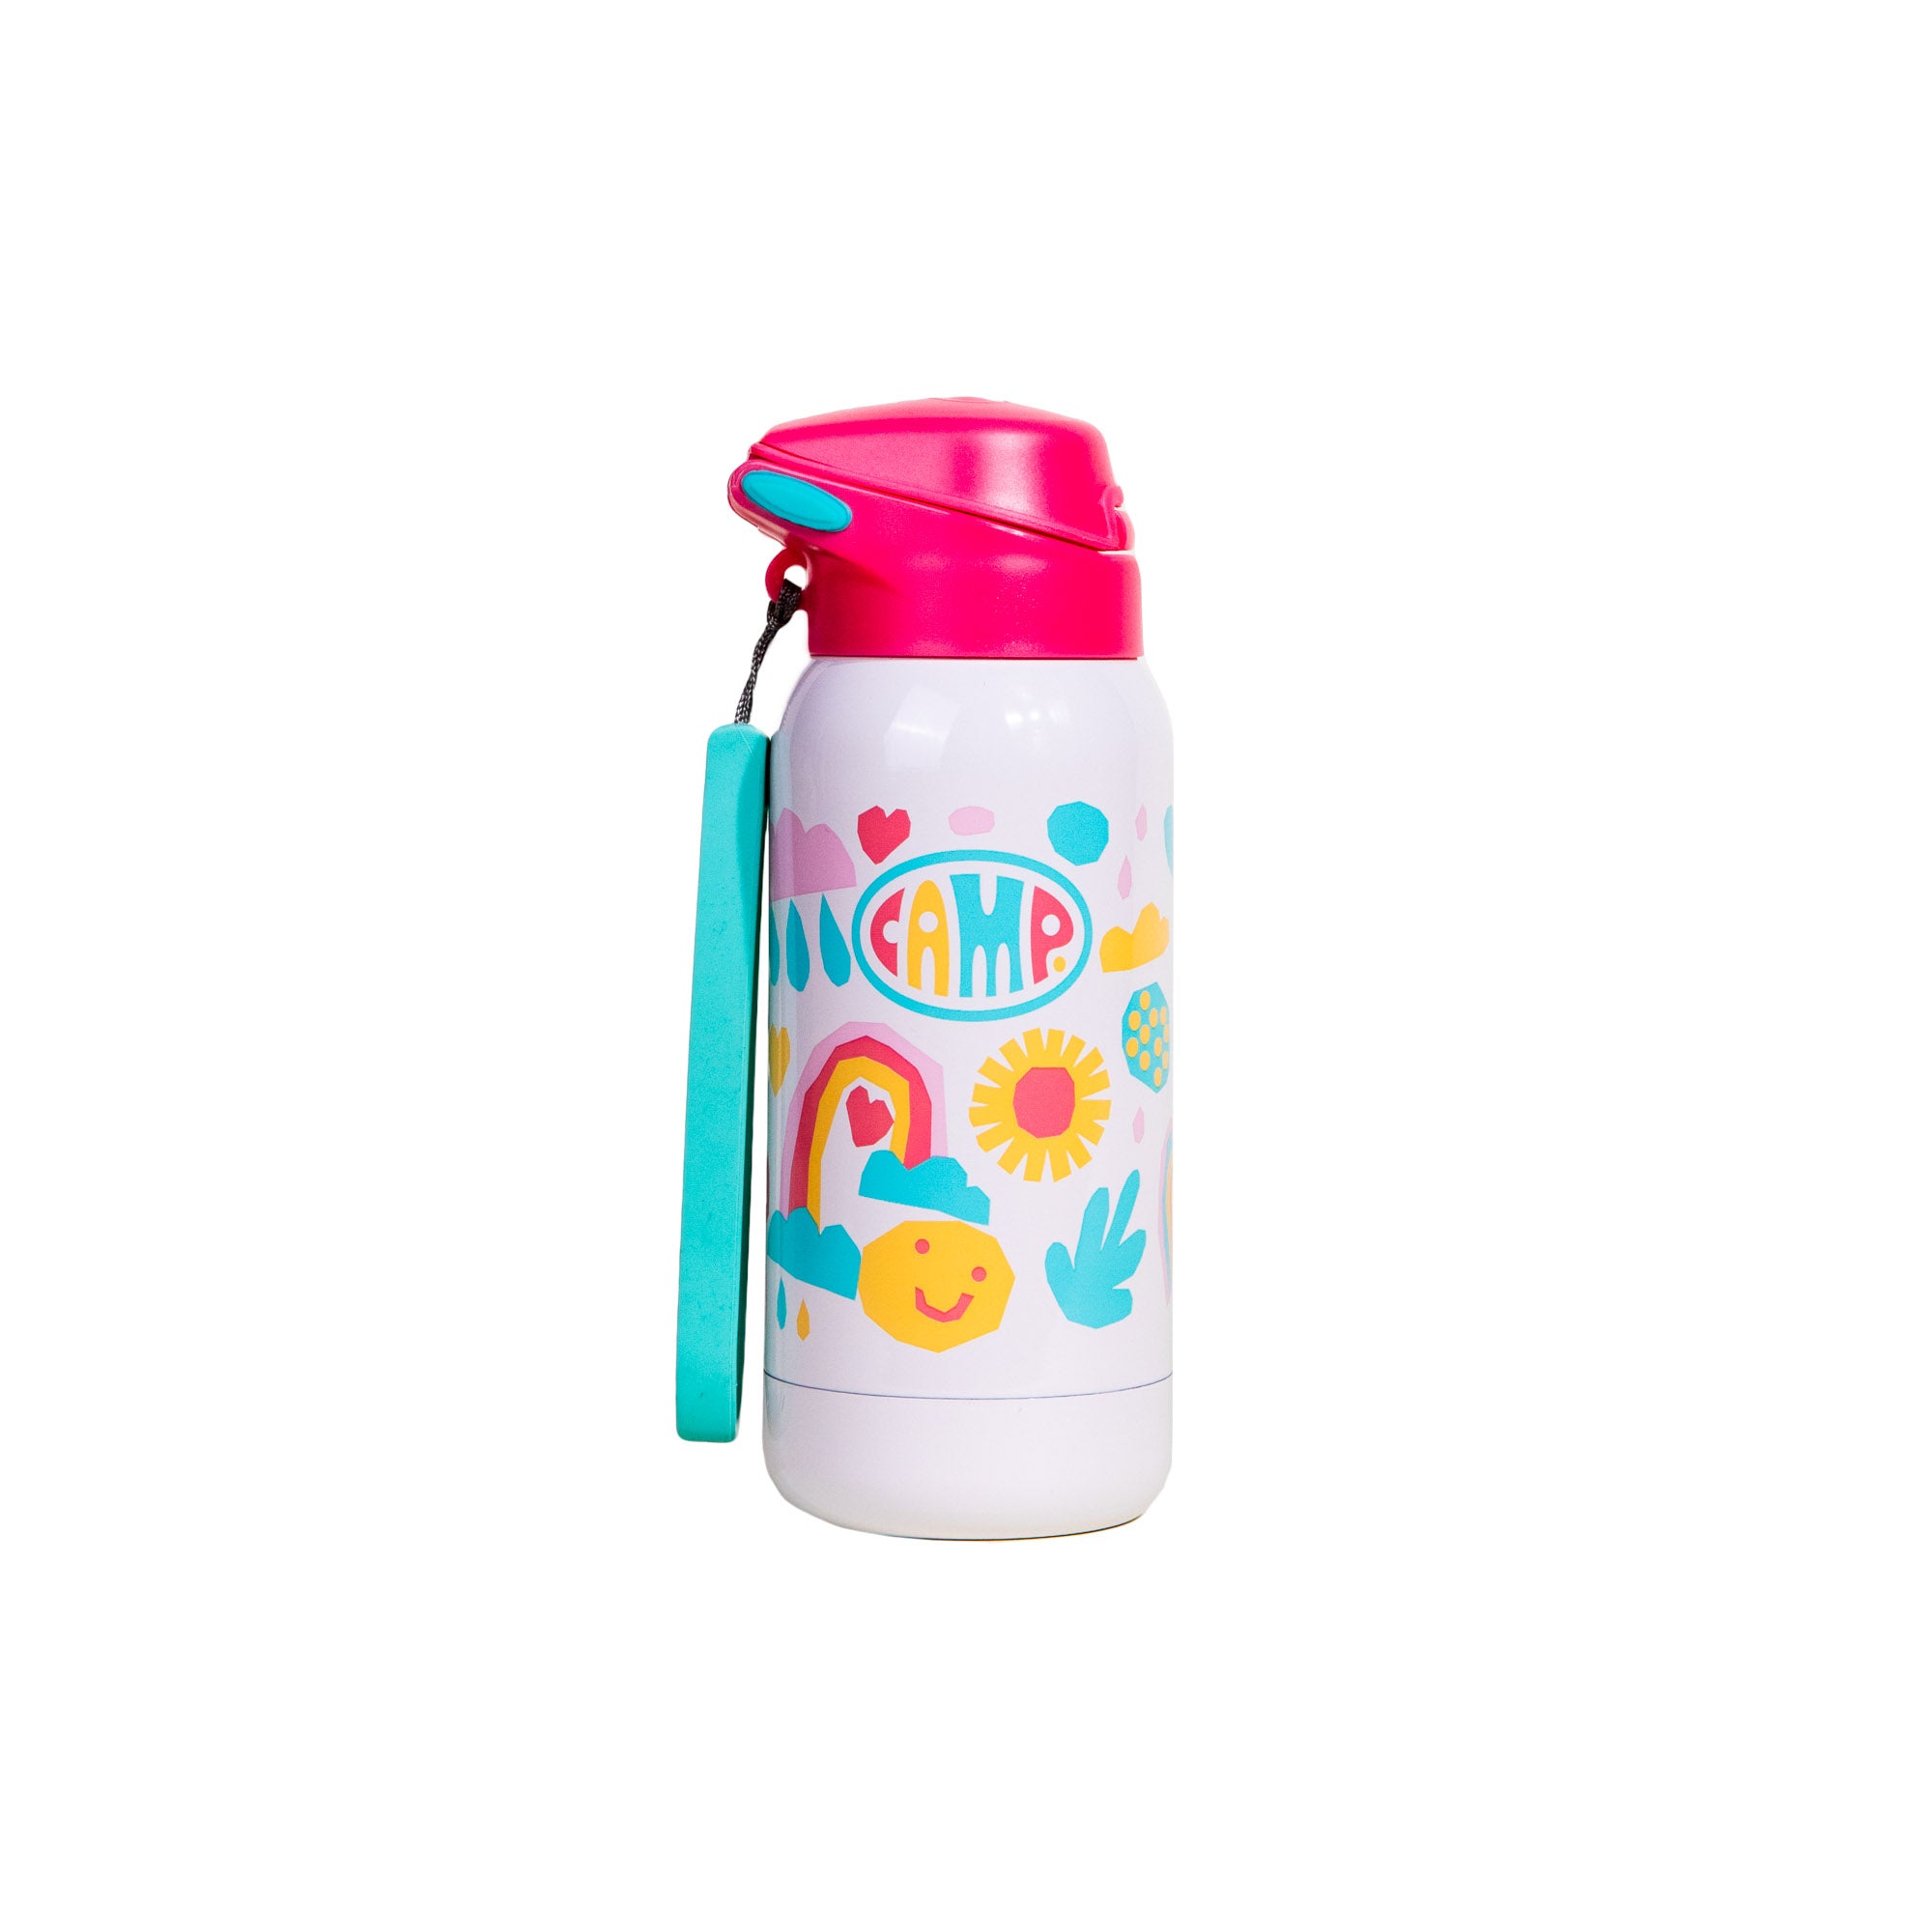 https://cdn.shopify.com/s/files/1/0569/0041/9738/products/68199_CAMP_KidWaterBottle_Cream_Rainbows.jpg?v=1675102153